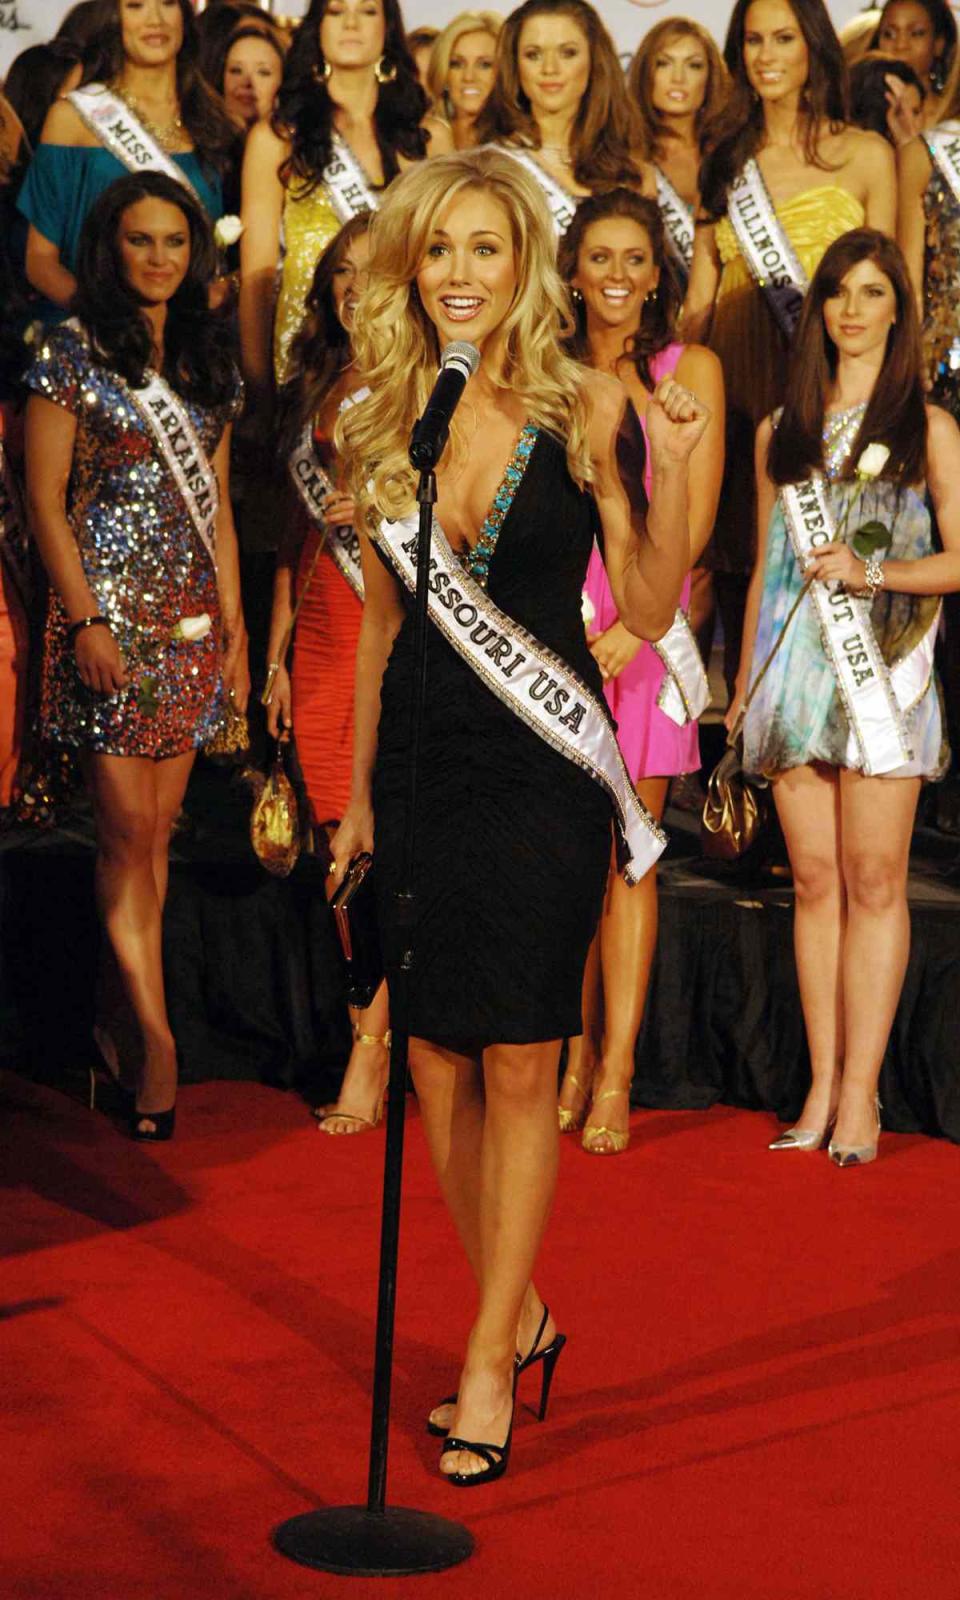 Miss Missouri Candice Crawford arrives at Planet Hollywood Resort & Casino on March 27, 2008 in Las Vegas, Nevada